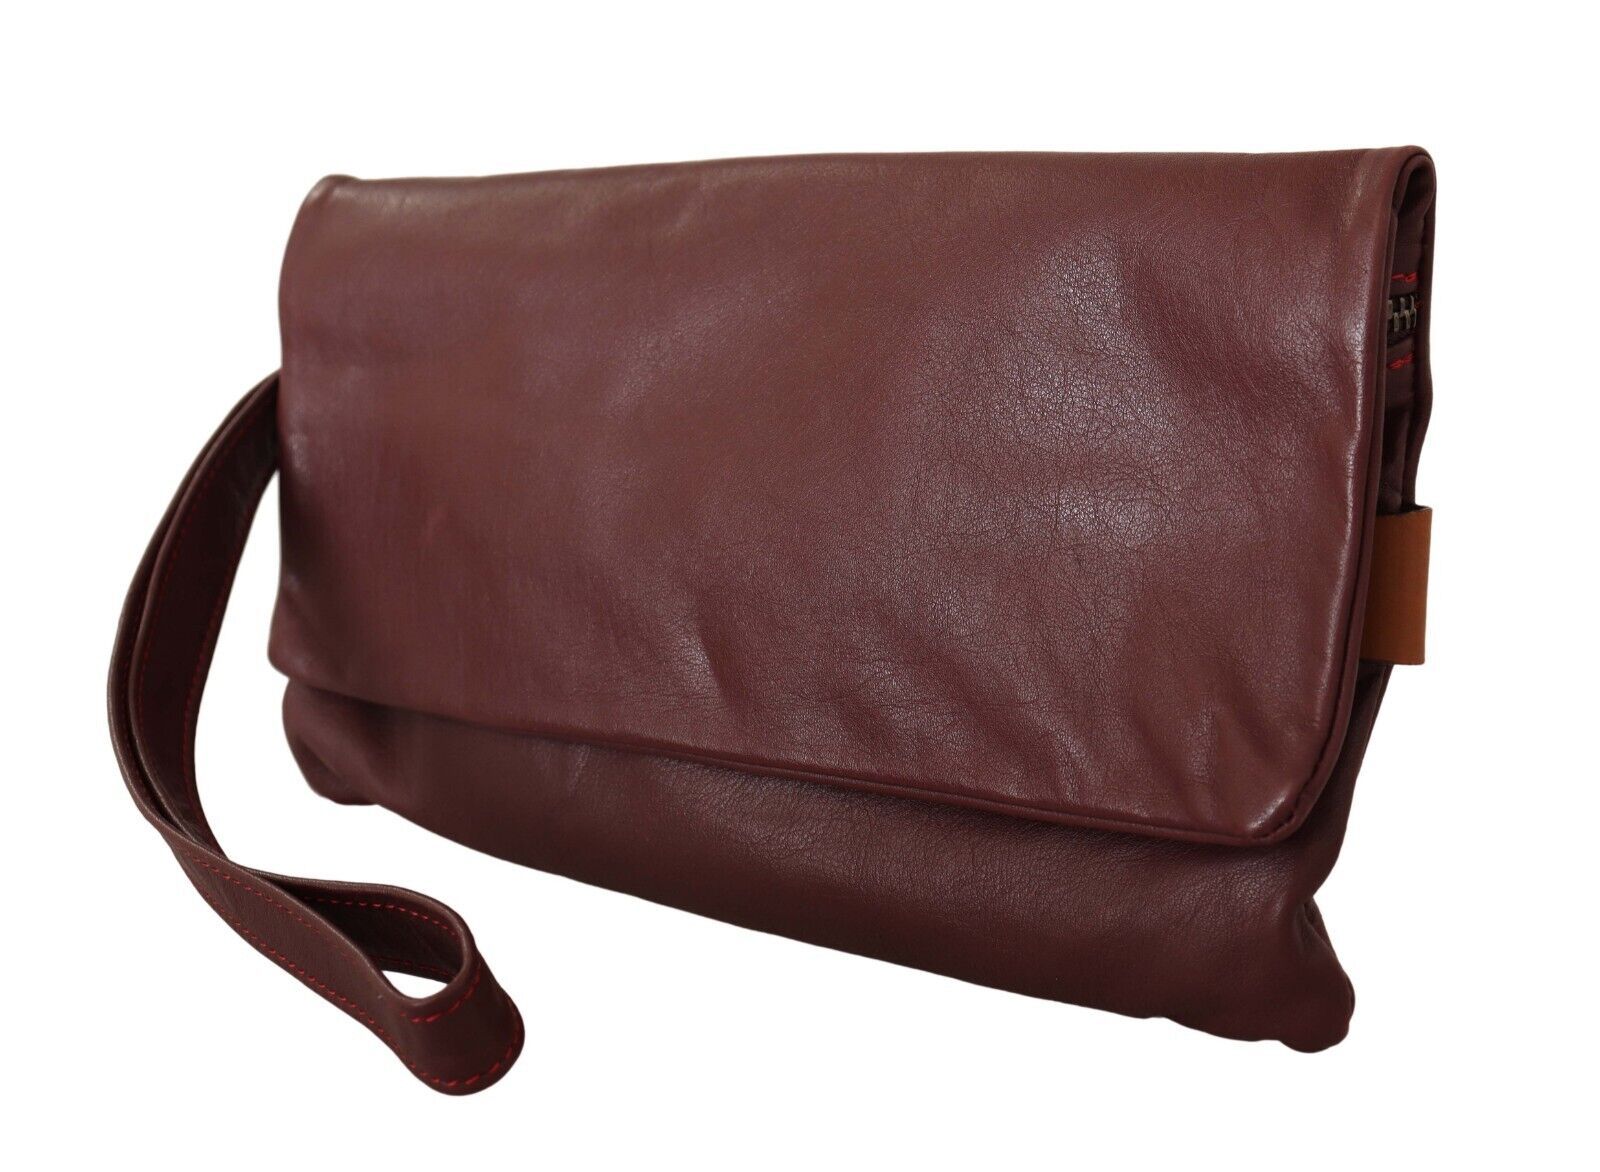 Elegant Brown Leather Clutch with Silver Detailing.